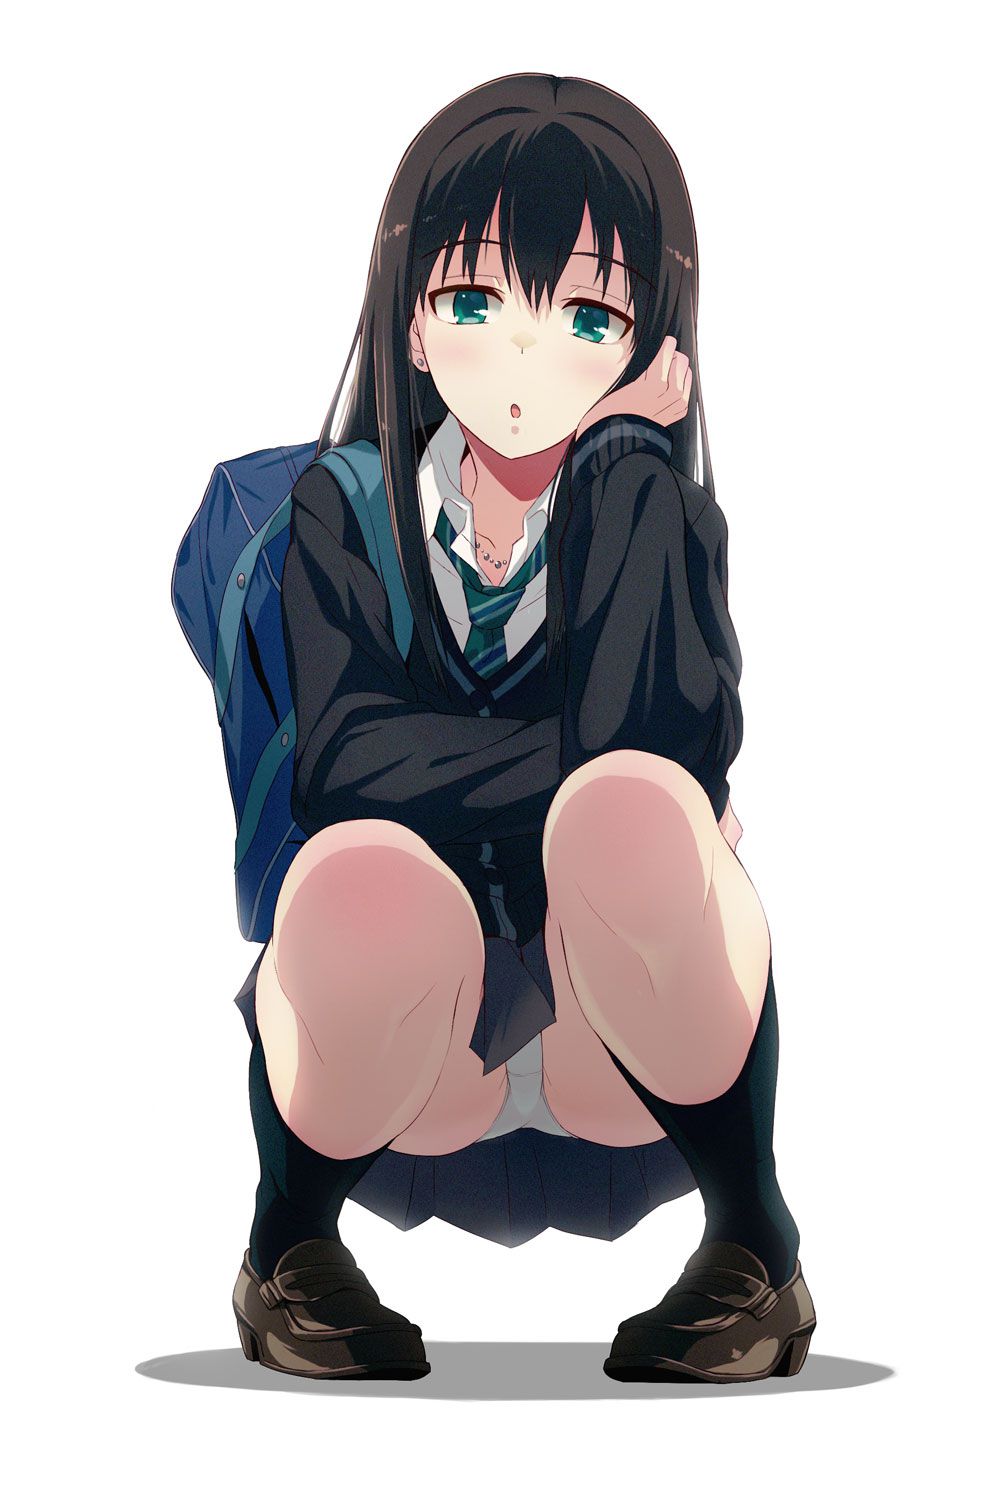 Picture of a girl squatting in a crouching skirt part 3 28